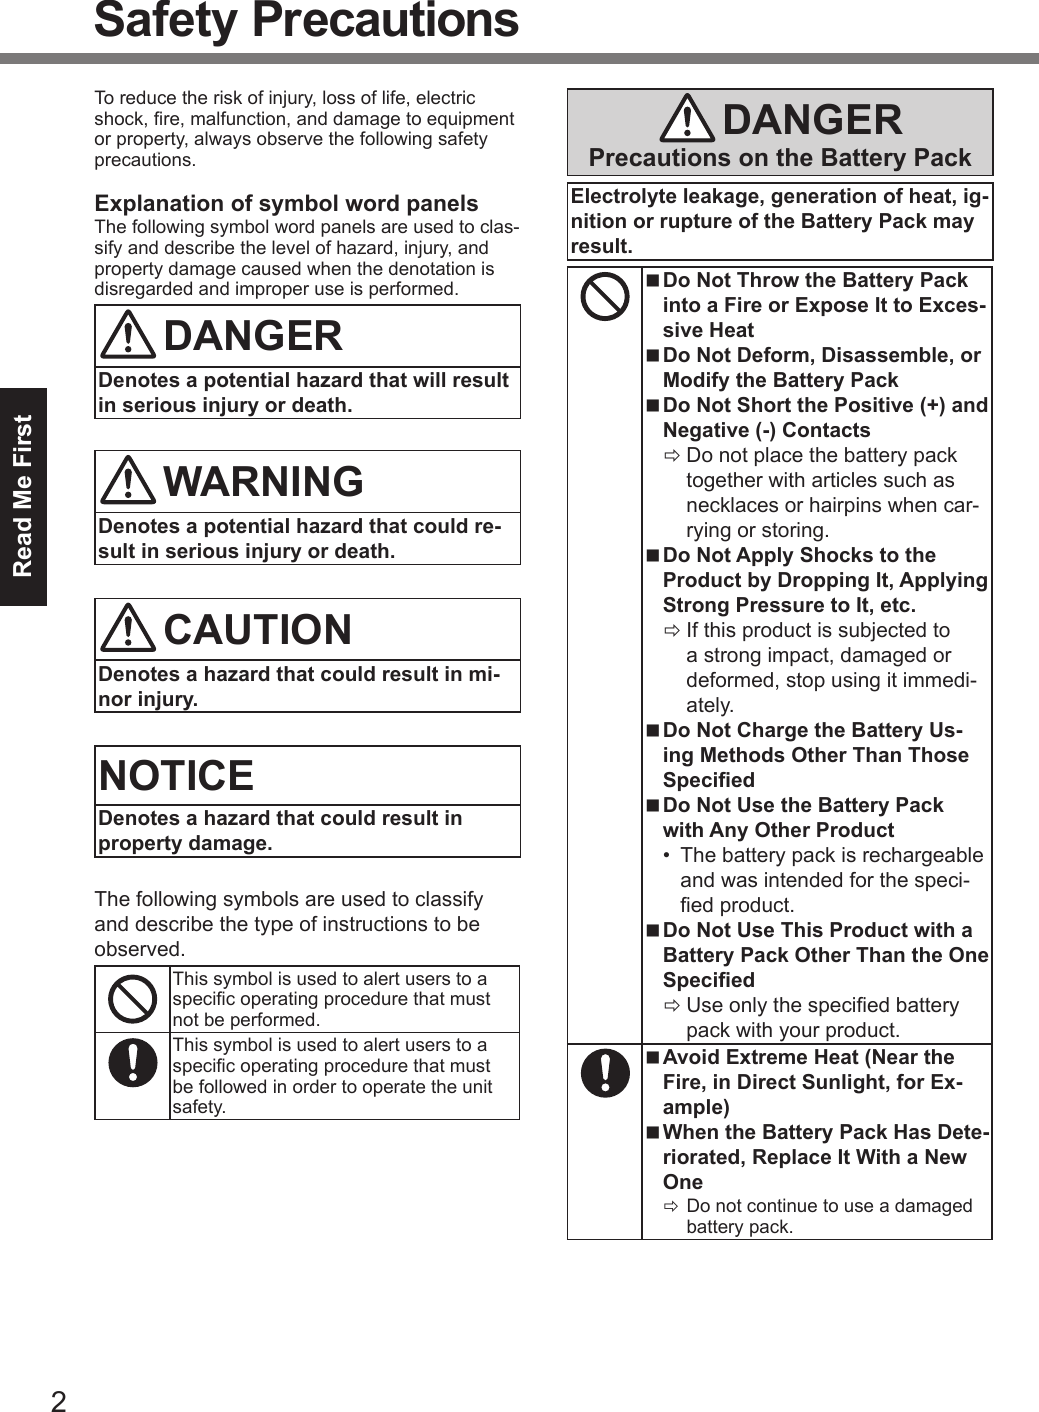 2Read Me FirstSafety PrecautionsTo reduce the risk of injury, loss of life, electric shock, re, malfunction, and damage to equipment or property, always observe the following safety precautions.Explanation of symbol word panelsThe following symbol word panels are used to clas-sify and describe the level of hazard, injury, and property damage caused when the denotation is disregarded and improper use is performed.DANGERDenotes a potential hazard that will result in serious injury or death.WARNINGDenotes a potential hazard that could re-sult in serious injury or death.CAUTIONDenotes a hazard that could result in mi-nor injury.NOTICEDenotes a hazard that could result in property damage.The following symbols are used to classify and describe the type of instructions to be observed.This symbol is used to alert users to a specic operating procedure that must not be performed.This symbol is used to alert users to a specic operating procedure that must be followed in order to operate the unit safety.DANGERPrecautions on the Battery PackElectrolyte leakage, generation of heat, ig-nition or rupture of the Battery Pack may result. nDo Not Throw the Battery Packinto a Fire or Expose It to Exces-sive Heat nDo Not Deform, Disassemble, orModify the Battery Pack nDo Not Short the Positive (+) andNegative (-) Contacts ÖDo not place the battery packtogether with articles such as necklaces or hairpins when car-rying or storing. nDo Not Apply Shocks to theProduct by Dropping It, ApplyingStrong Pressure to It, etc. ÖIf this product is subjected toa strong impact, damaged or deformed, stop using it immedi-ately. nDo Not Charge the Battery Us-ing Methods Other Than ThoseSpecied nDo Not Use the Battery Packwith Any Other Product•The battery pack is rechargeableand was intended for the speci-ed product. nDo Not Use This Product with aBattery Pack Other Than the OneSpecied ÖUse only the specied batterypack with your product. nAvoid Extreme Heat (Near theFire, in Direct Sunlight, for Ex-ample) nWhen the Battery Pack Has Dete-riorated, Replace It With a NewOne ÖDo not continue to use a damagedbattery pack.